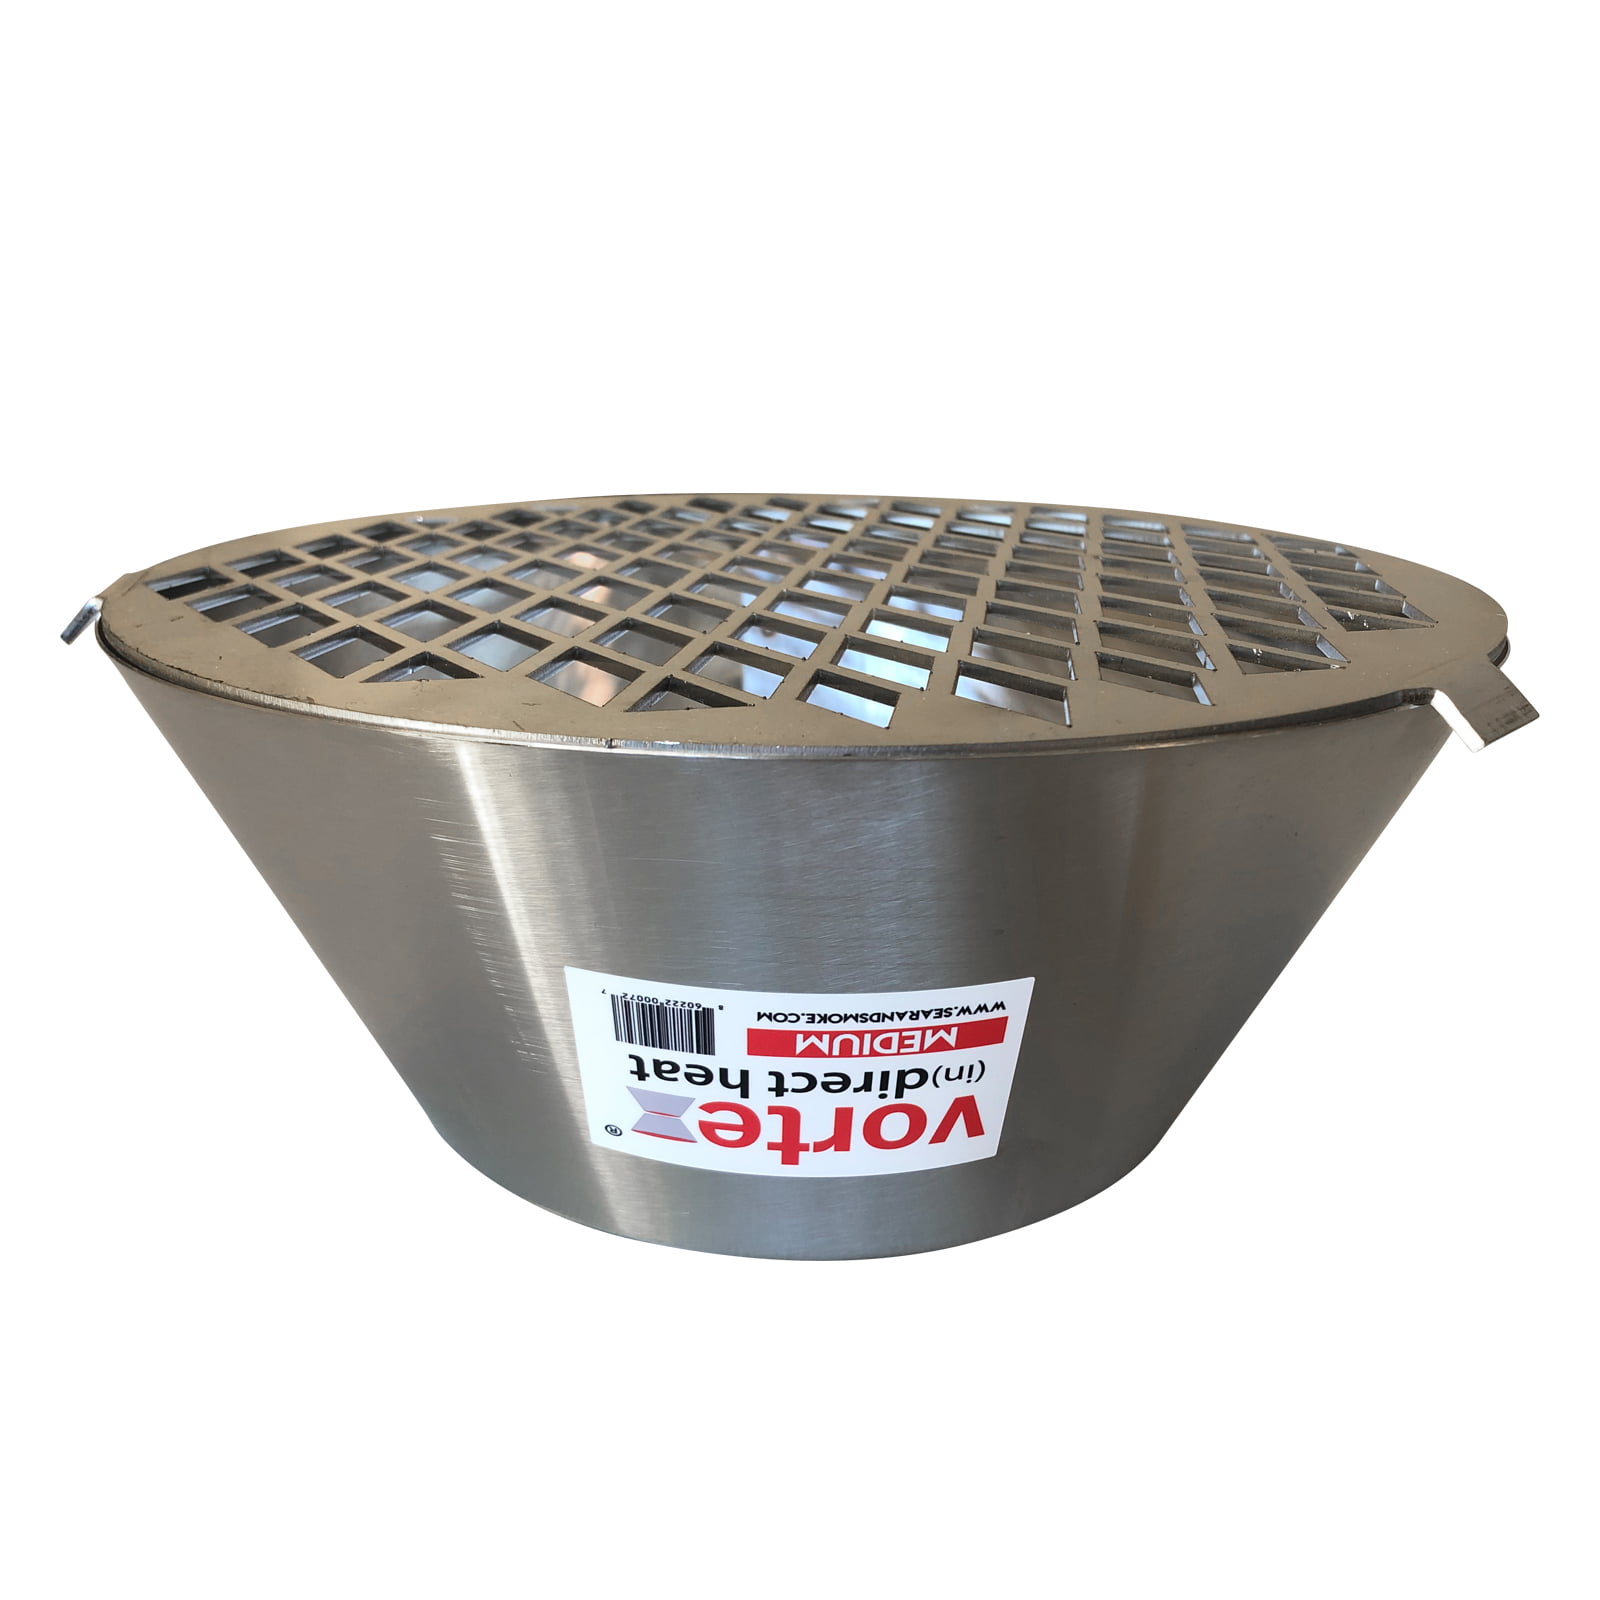 Haoo 8835 Cast Iron Cooking Grate and BBQ Whirlpool for Weber Kettle 22/26.75 WSM Weber Smokey Mountain Charcoal Briquet Holders